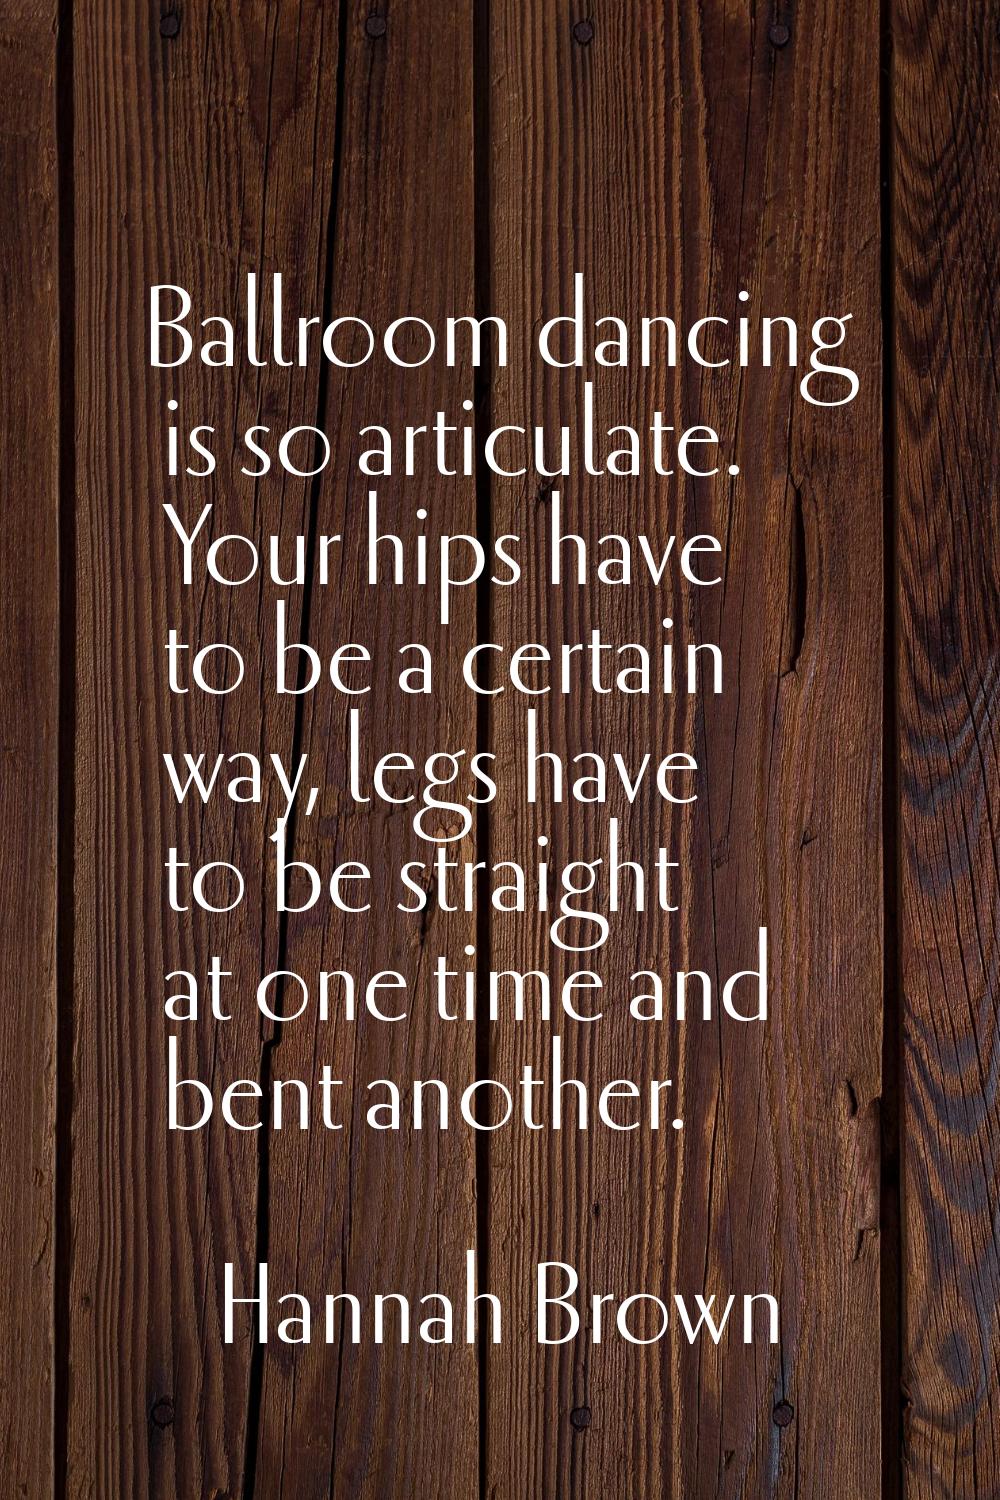 Ballroom dancing is so articulate. Your hips have to be a certain way, legs have to be straight at 